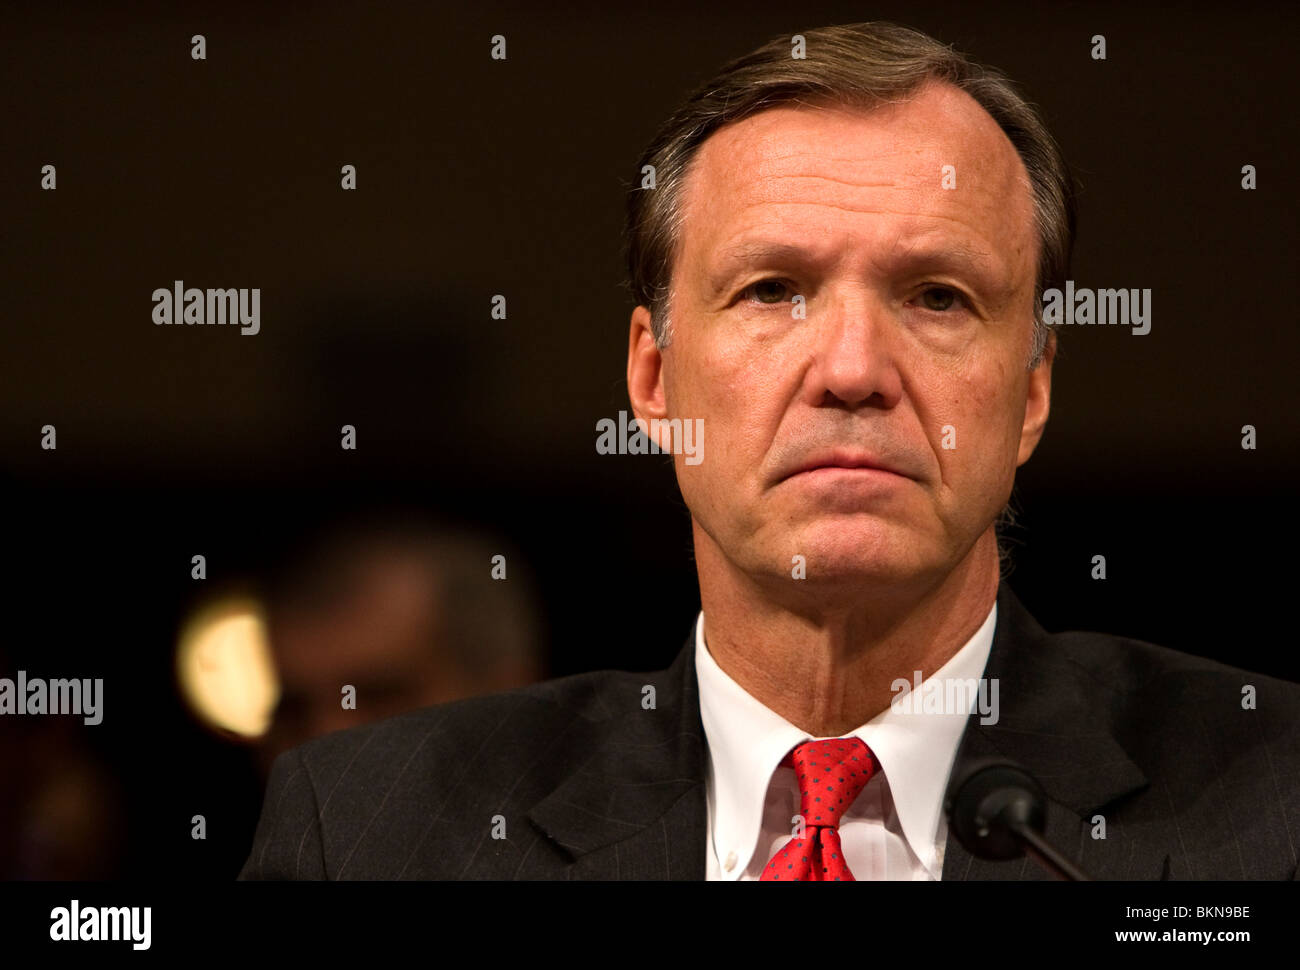 Securities And Exchange Commission Chairman Christopher Cox. Stockfoto